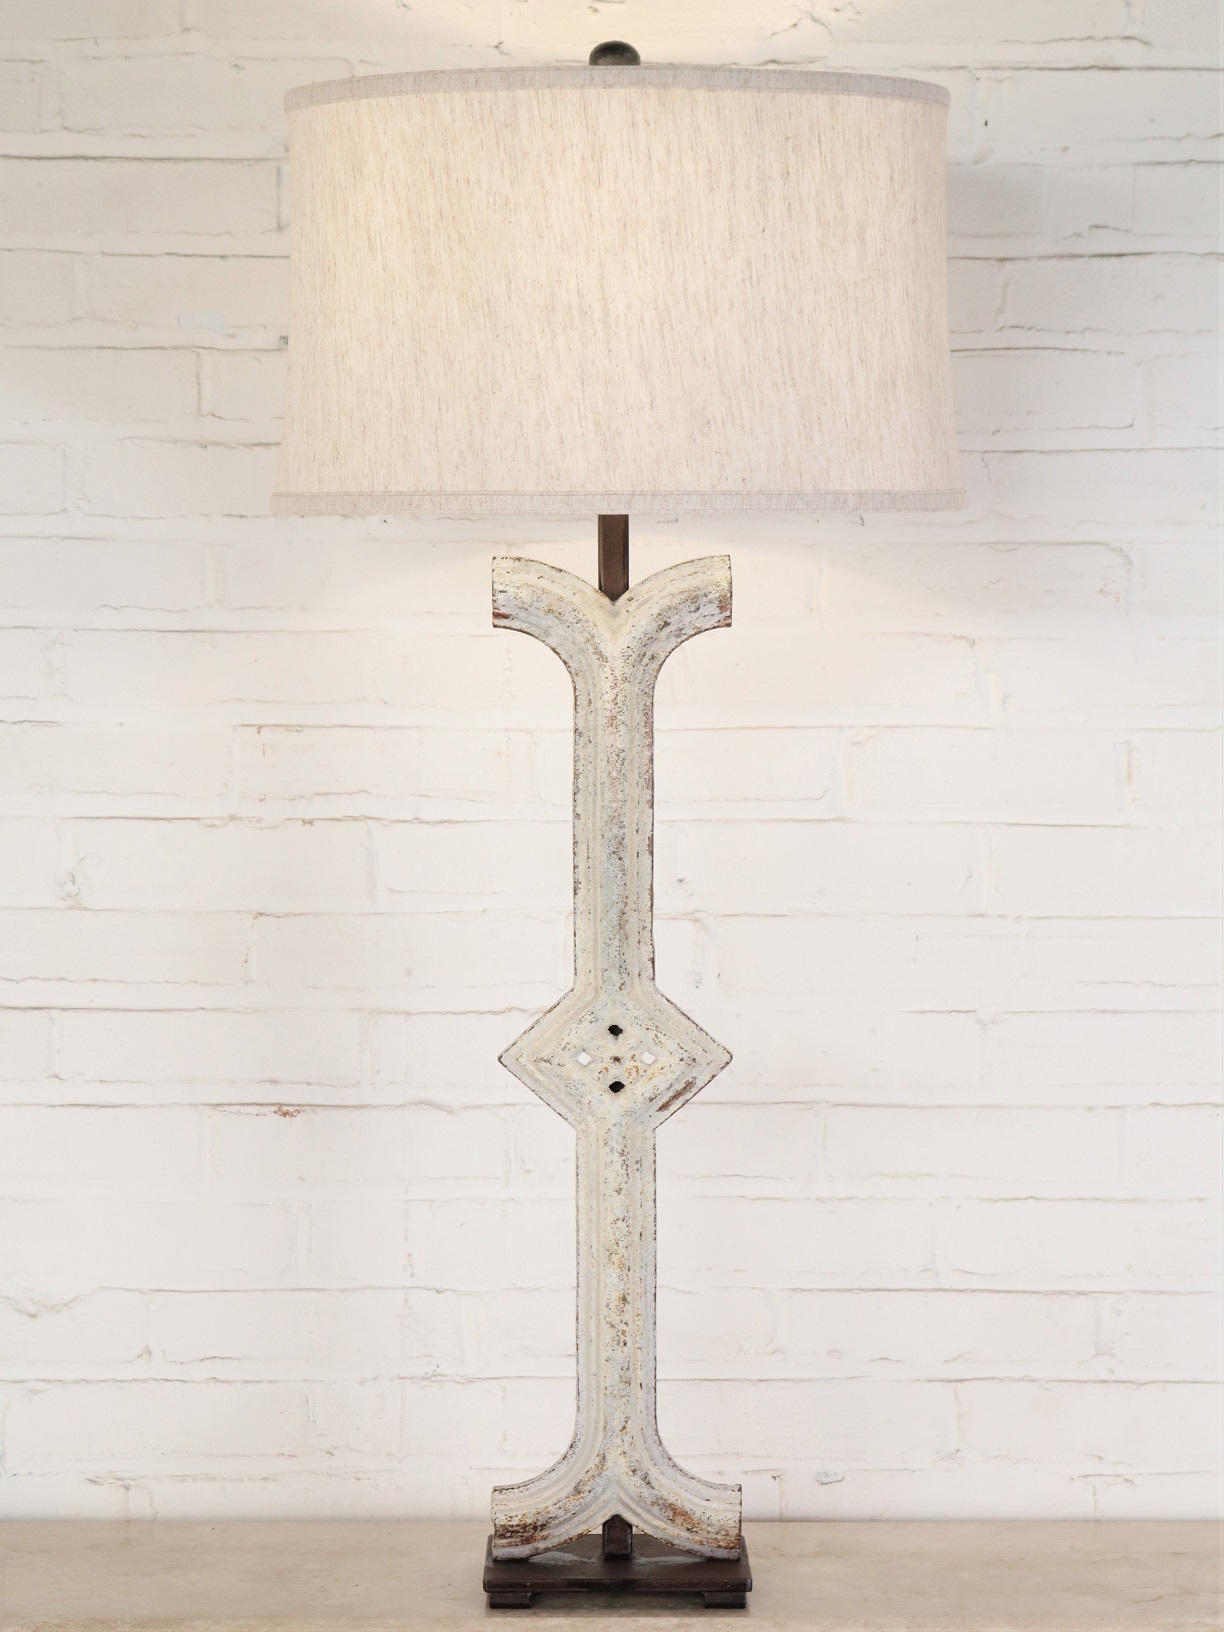 Diamond column custom iron table lamp with a white, distressed finish and a dark iron base. Paired with a 17 inch linen drum lamp shade.